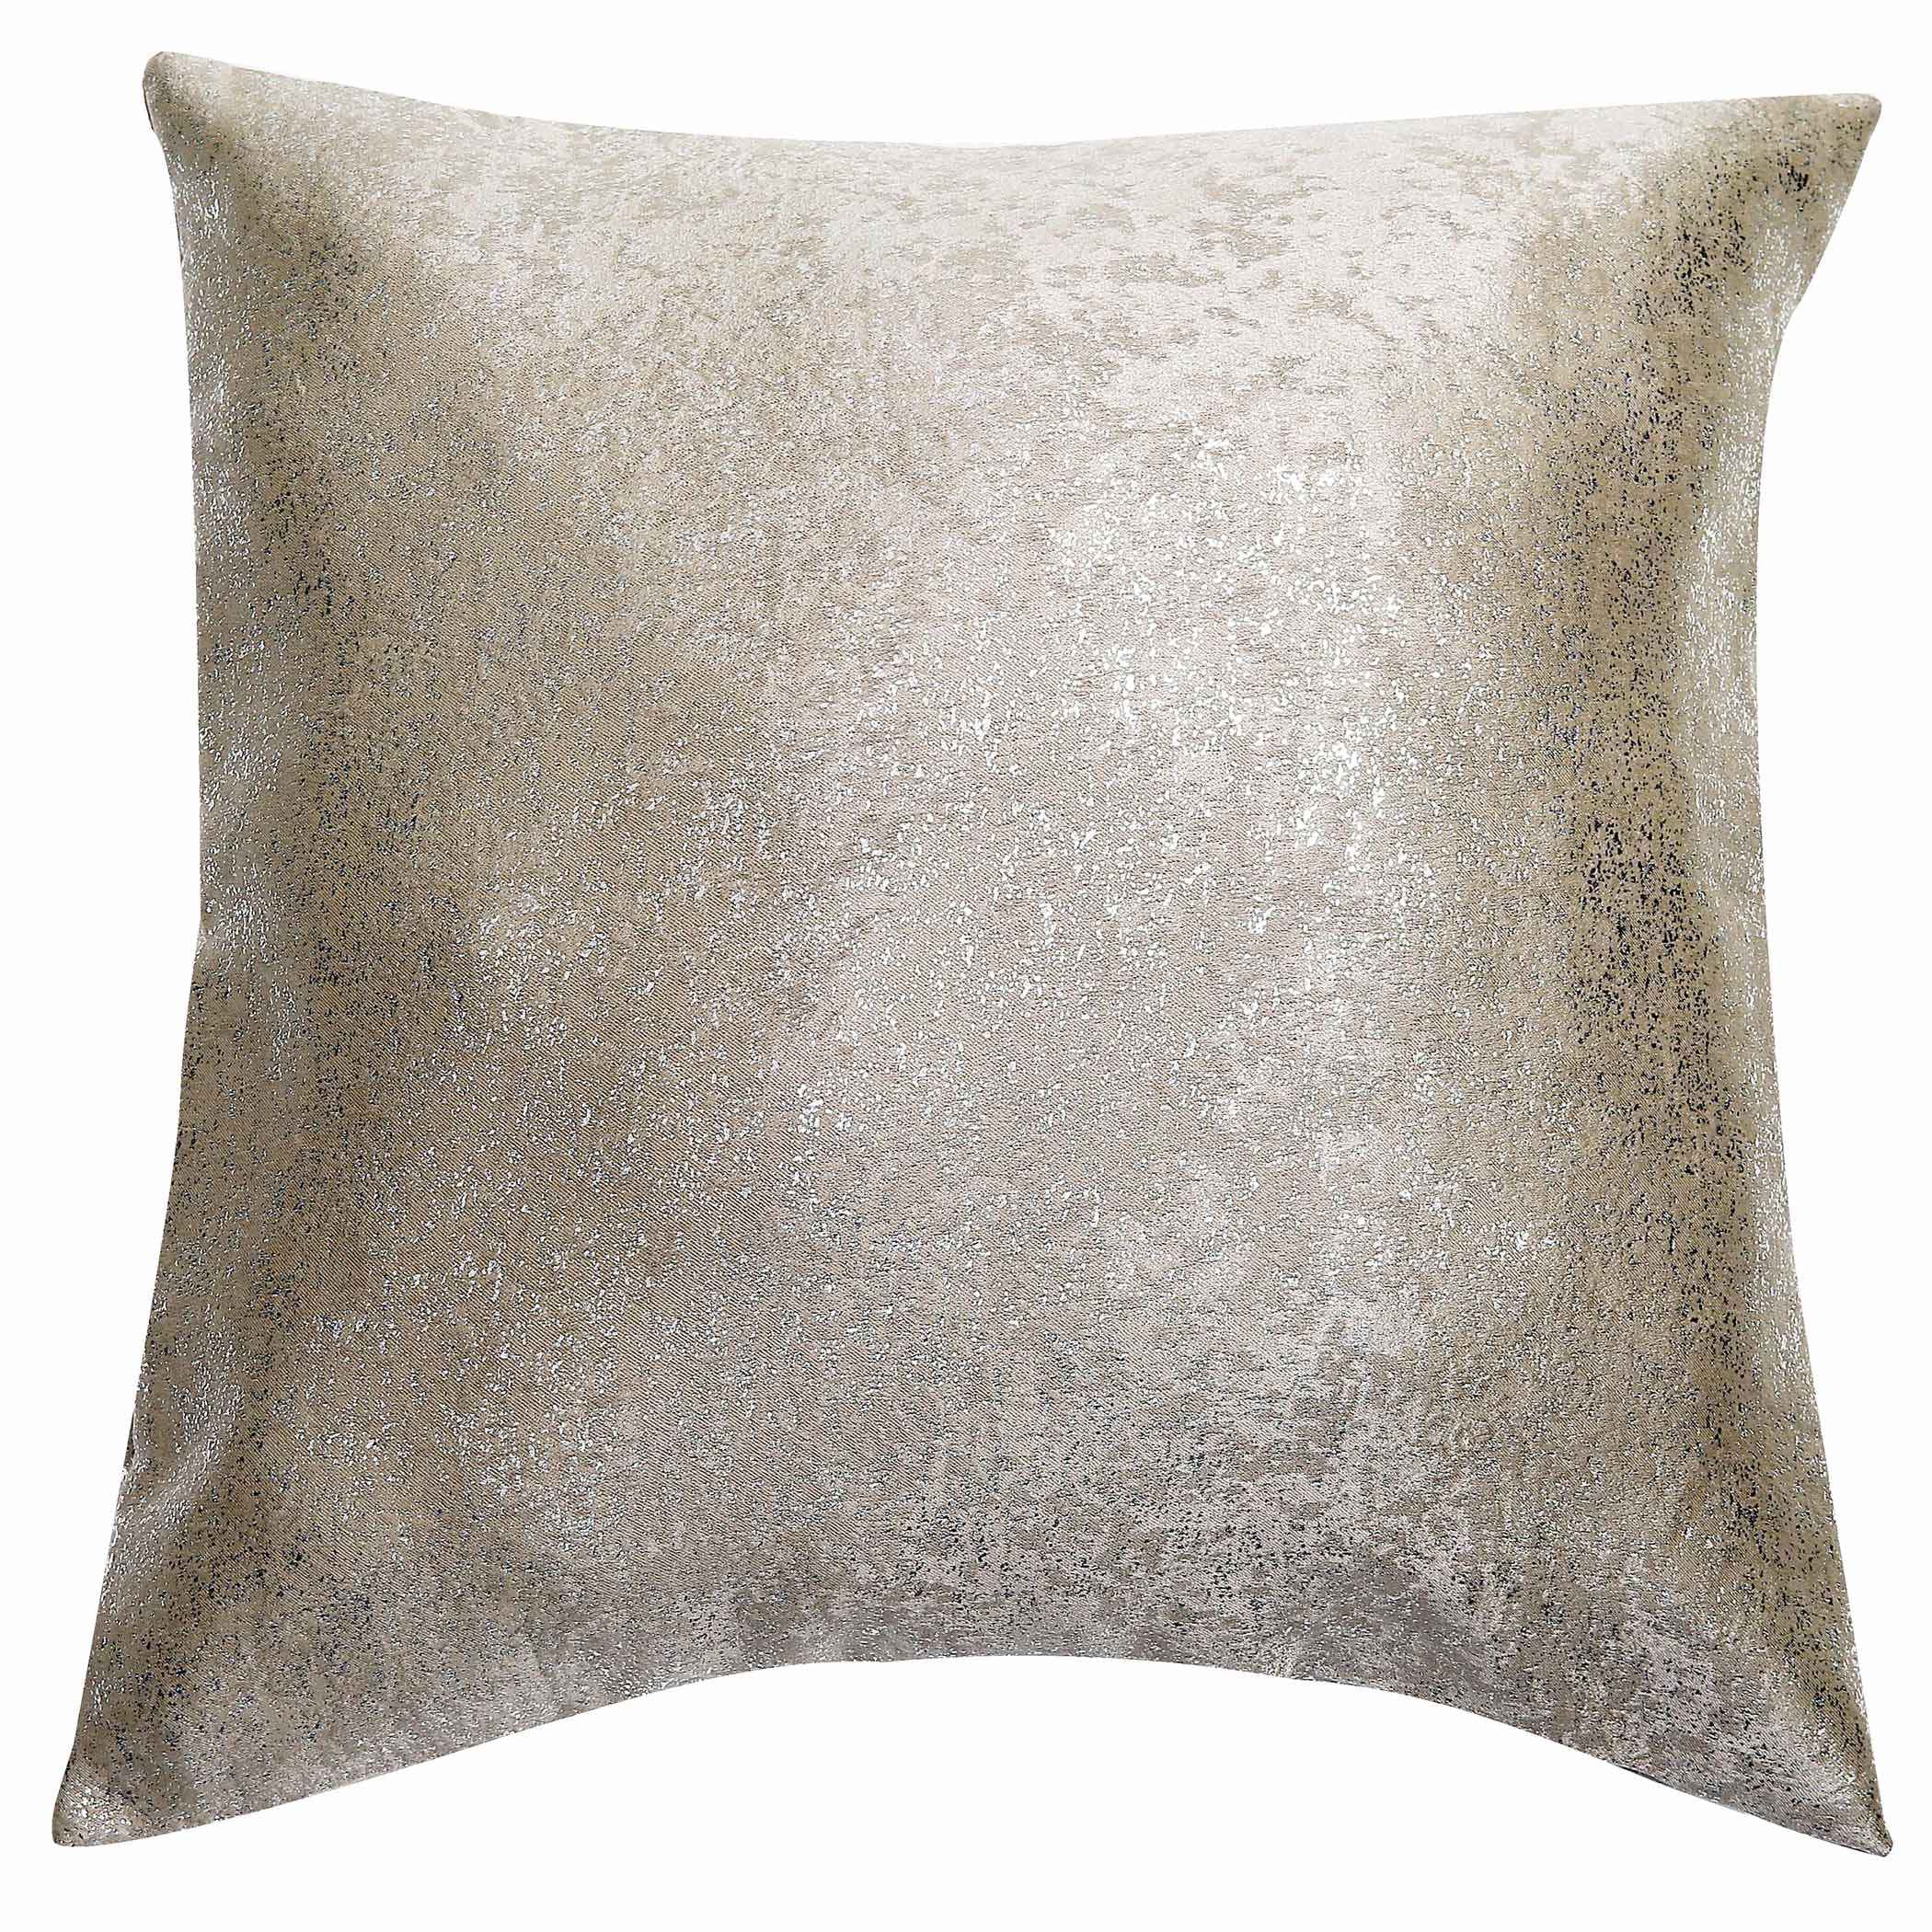 Taupe Single Euro/Square Size Pillow Sham with Metallic Accent 26in x 26in 1 